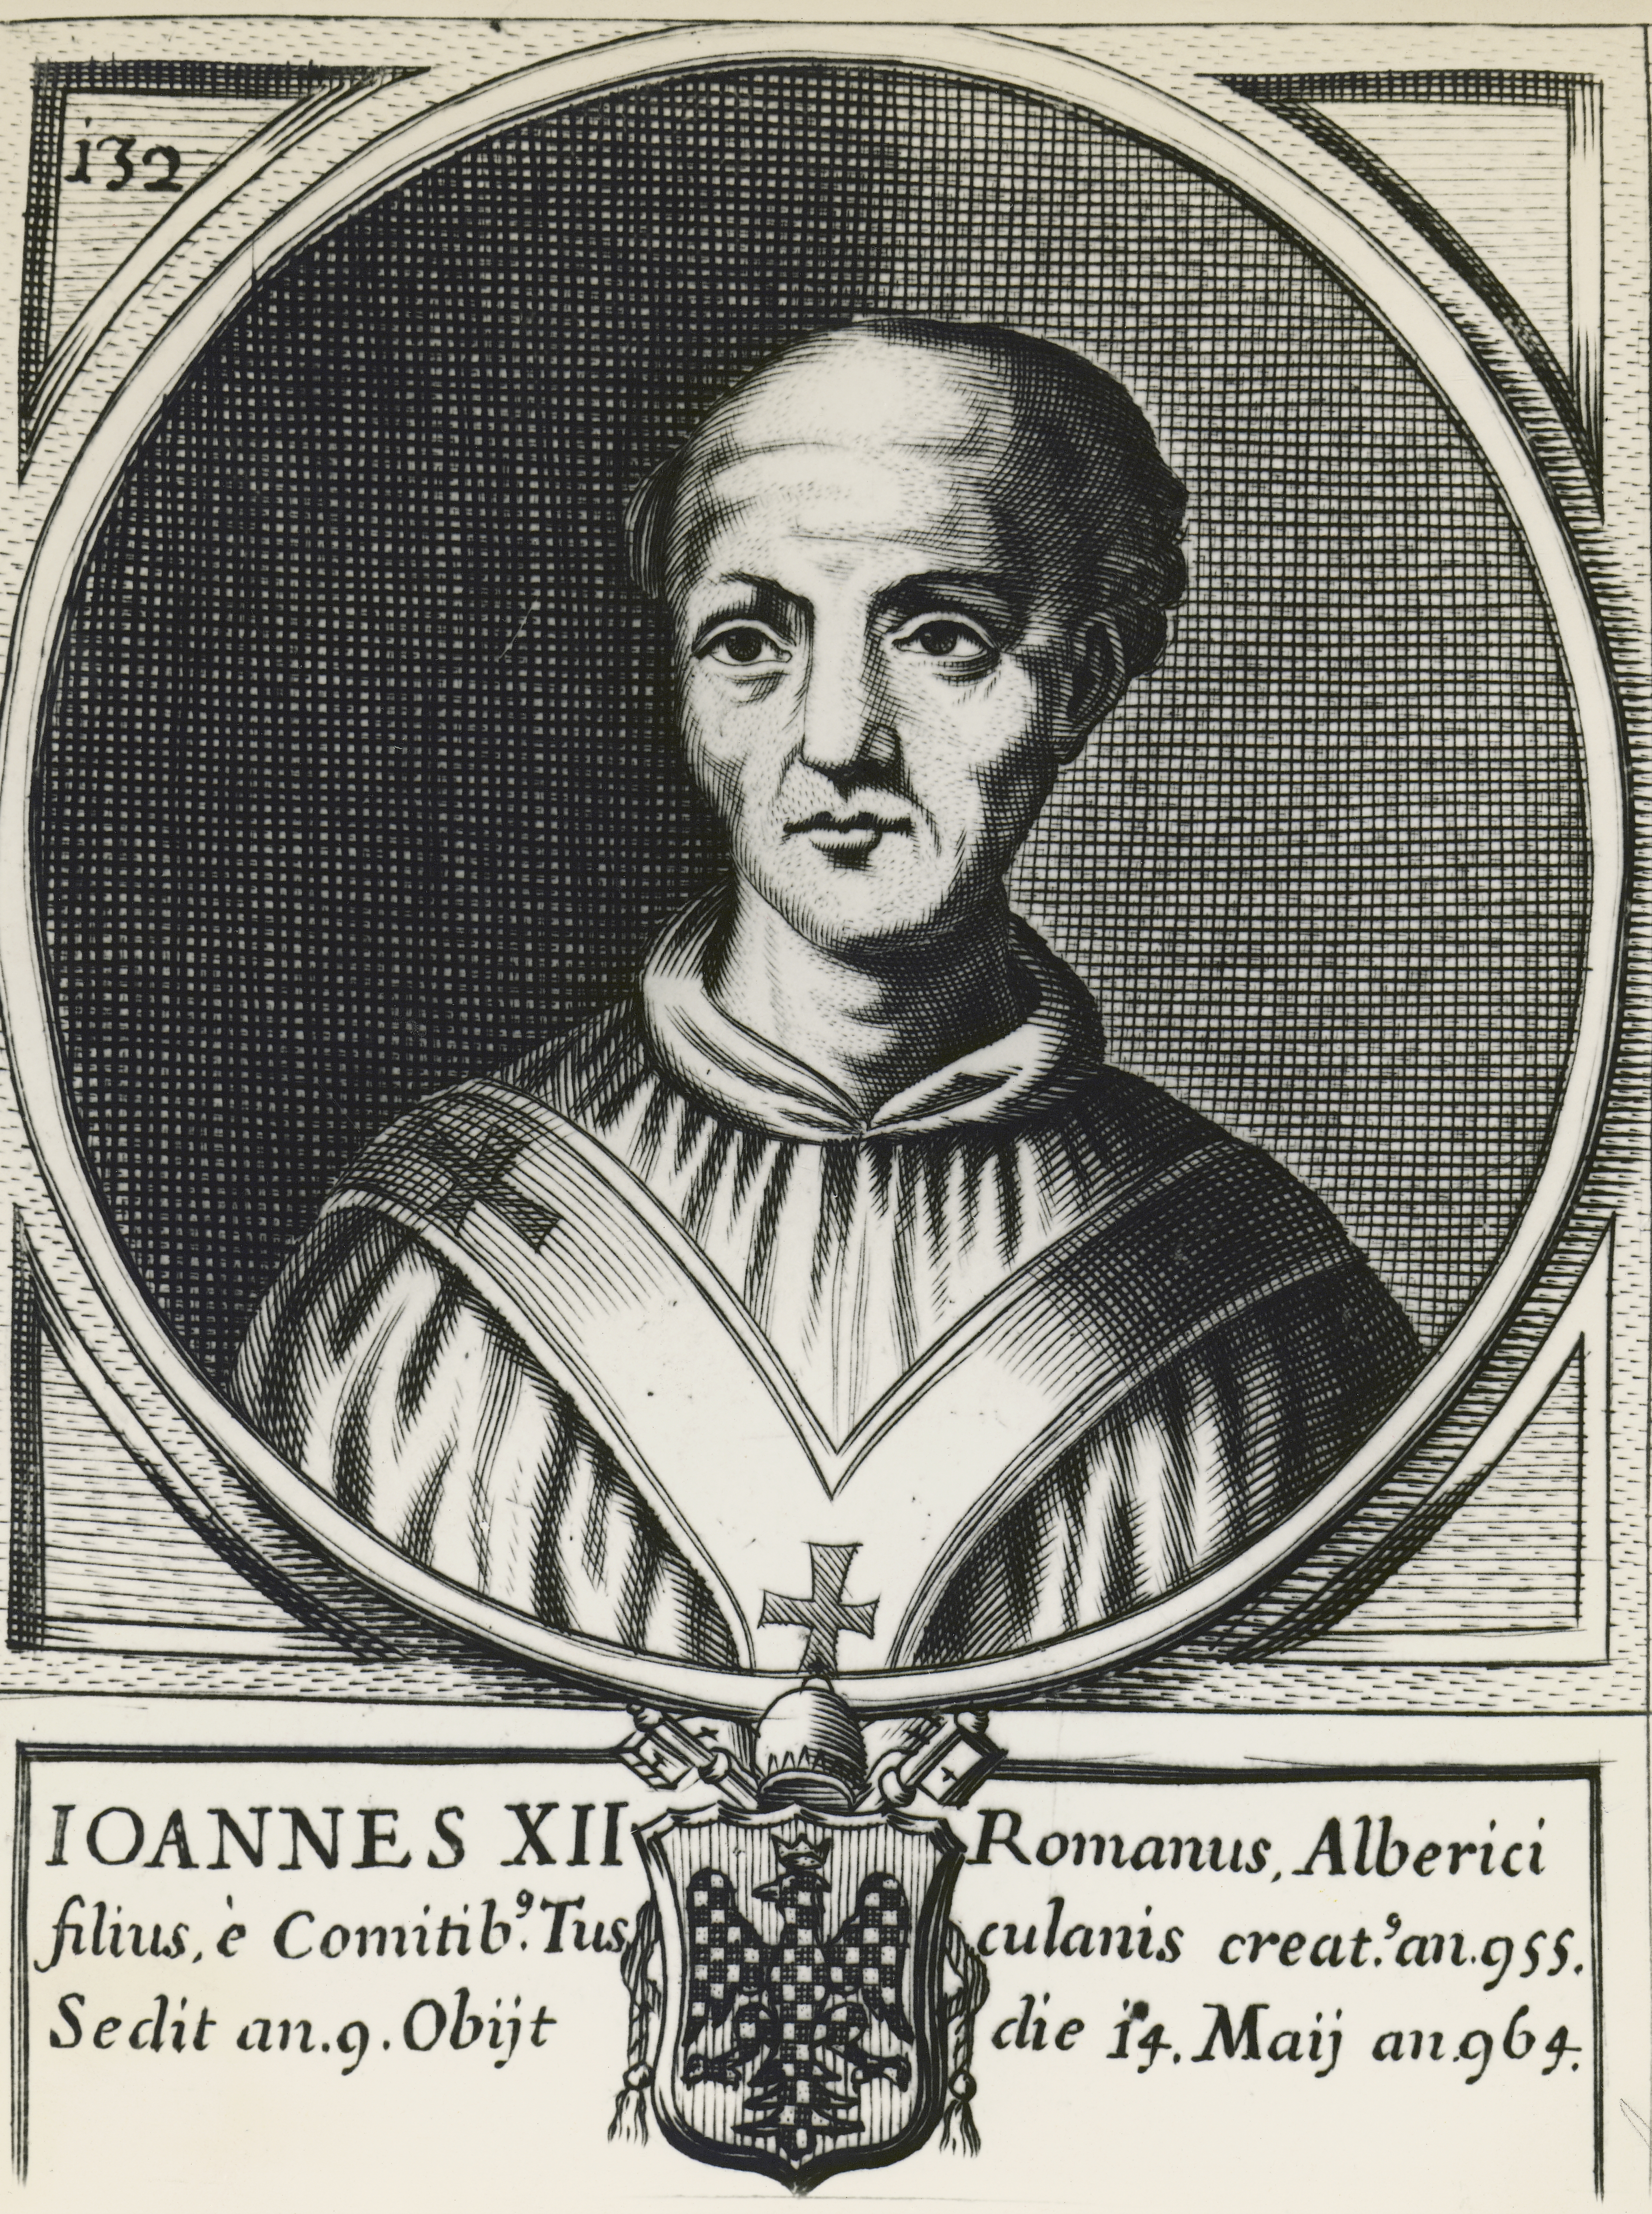 ITALY - DECEMBER 16: Portrait of Pope John XII, born Octavianus of Tusculum (937-964), engraving. Italy, 10th century. (Photo by DeAgostini/Getty Images) (De Agostini Picture Library, Agostini/Getty Images)